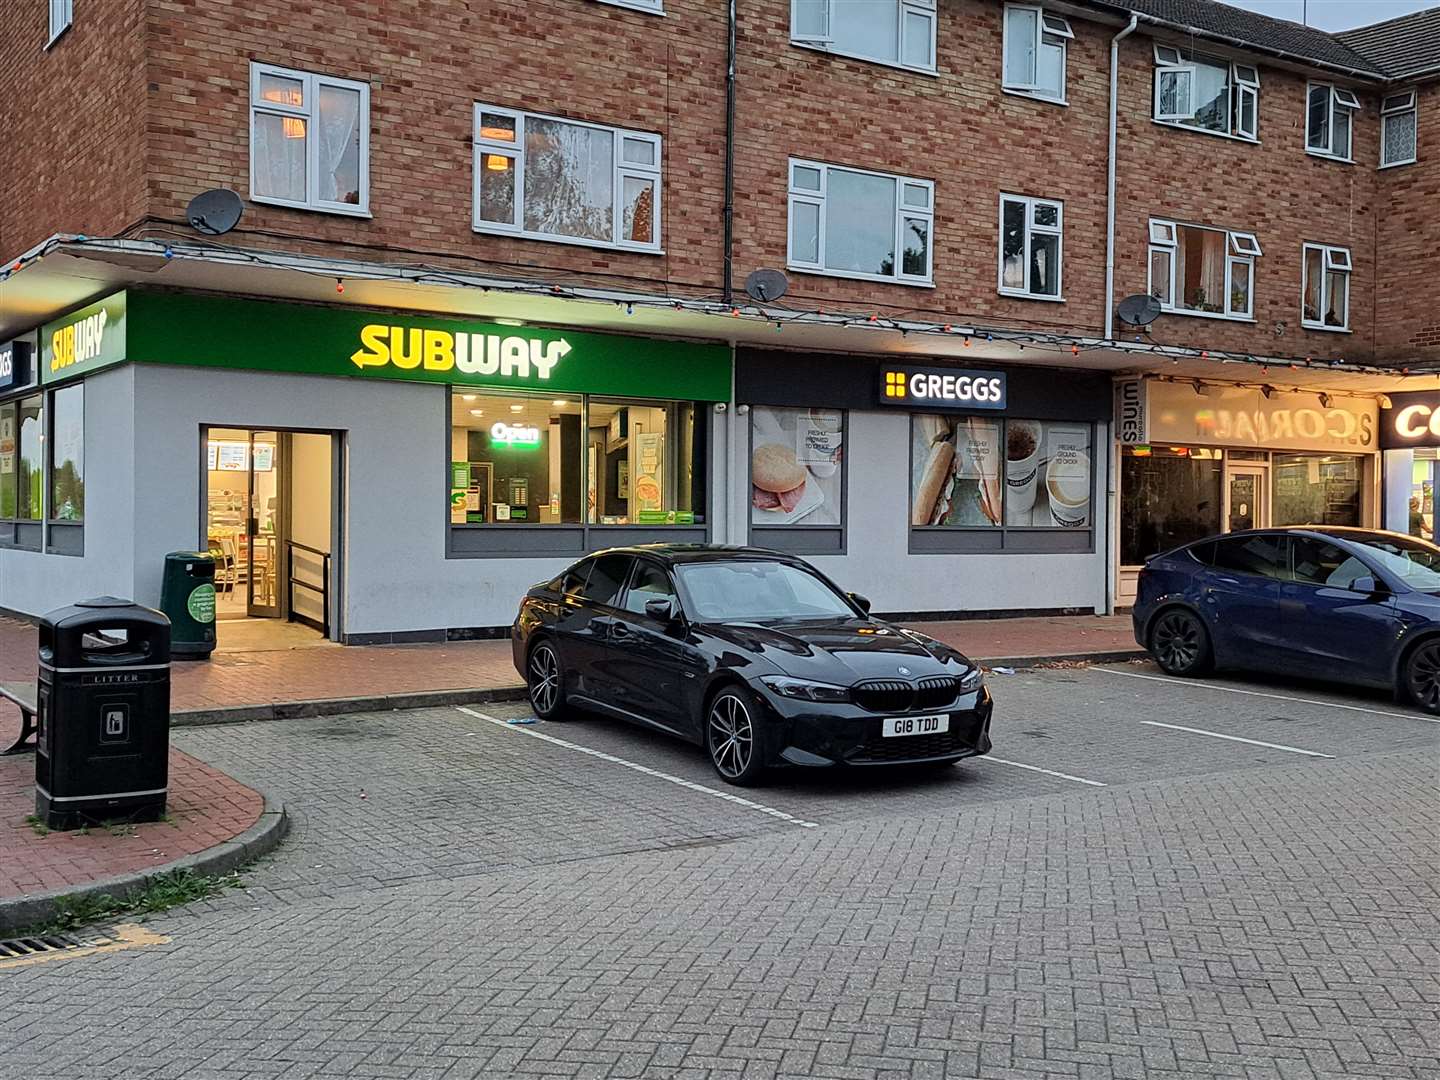 It is adjacent to a Subway and a Greggs